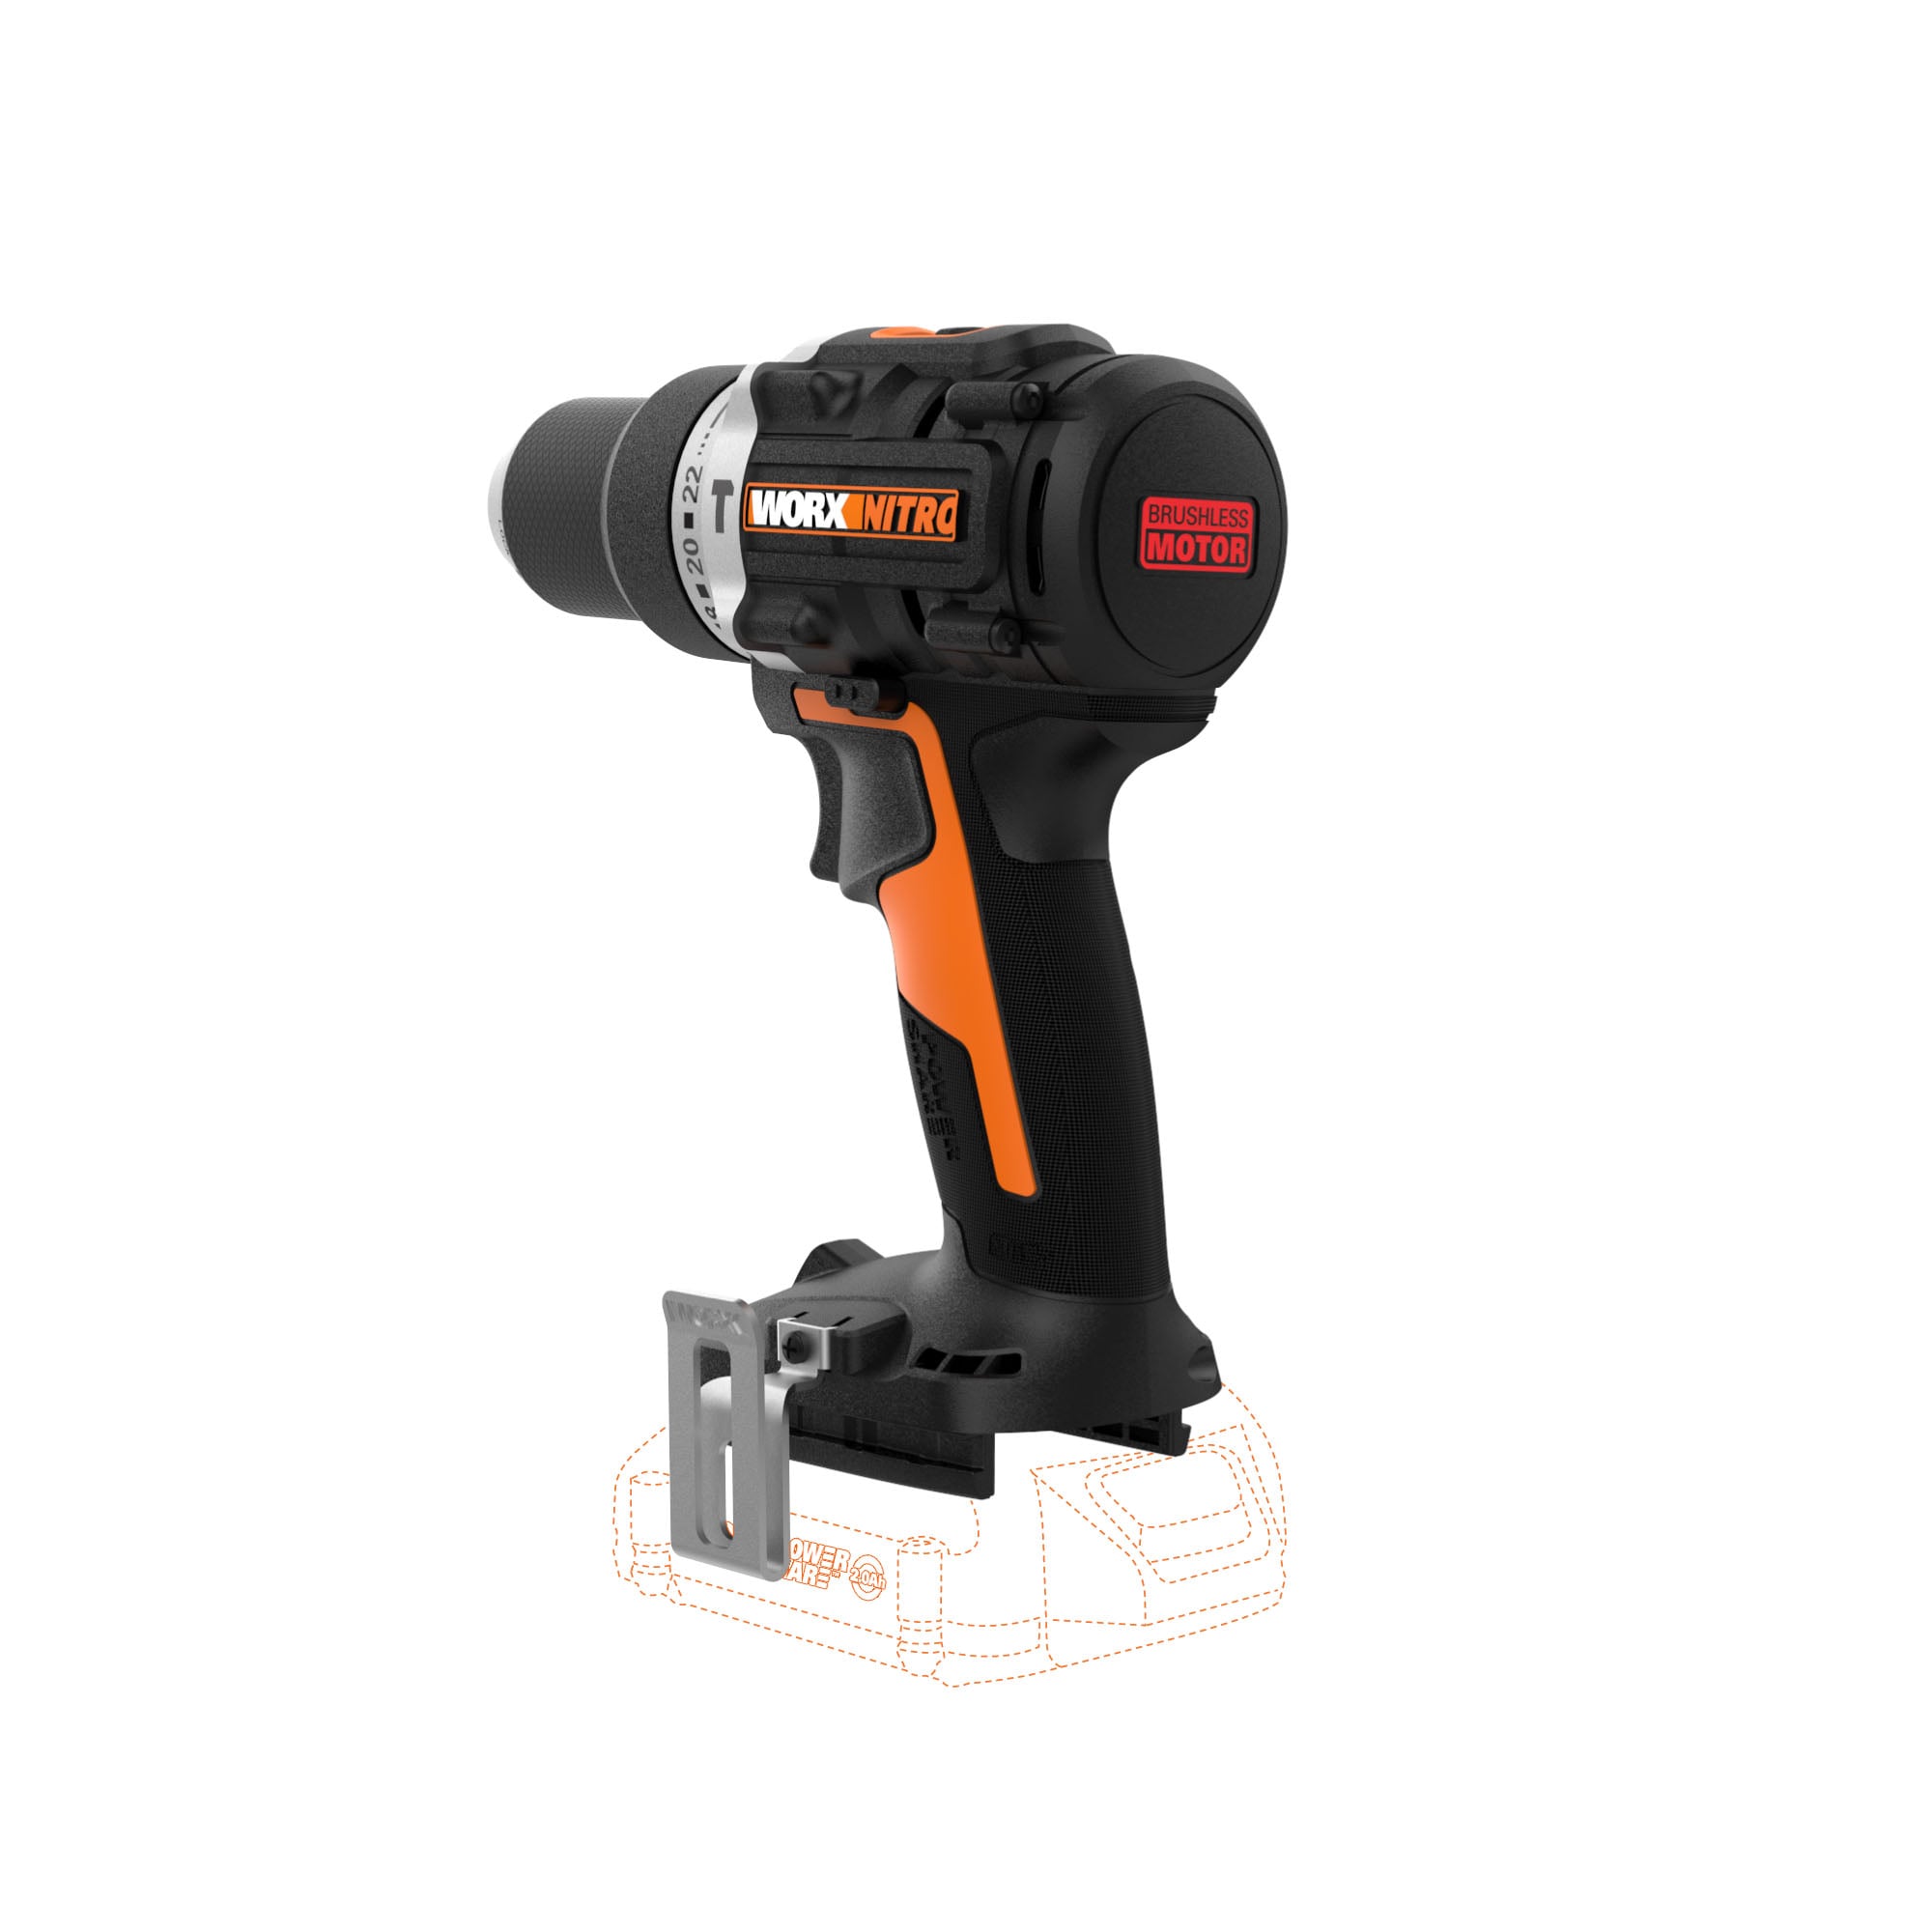 WORX Nitro Power Share 20-volt Max 1/2-in Brushless Cordless Drill